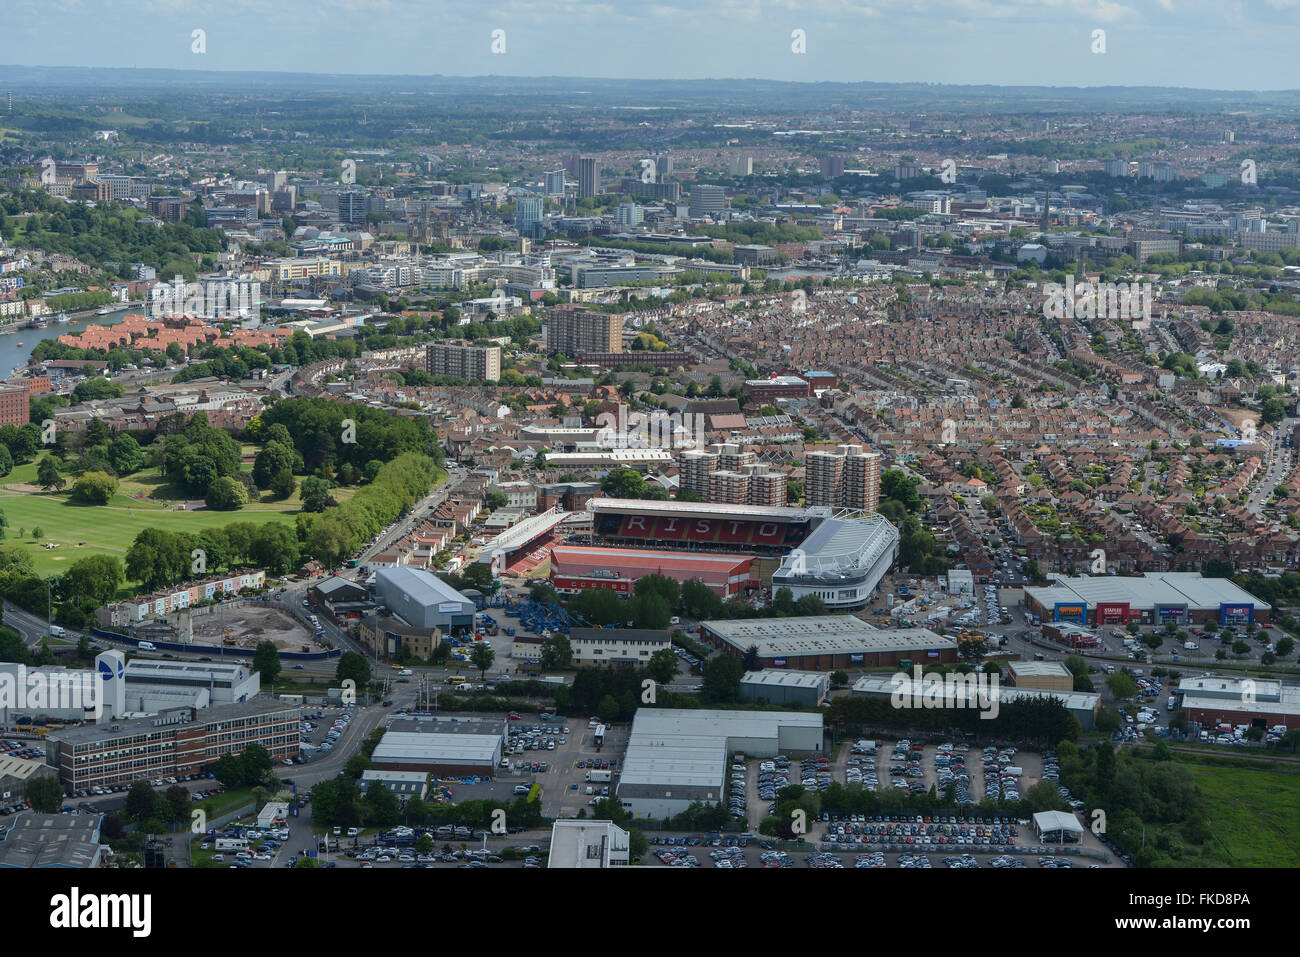 An aerial view of Bristol looking towards Ashton Gate with the city centre visible in the distance Stock Photo